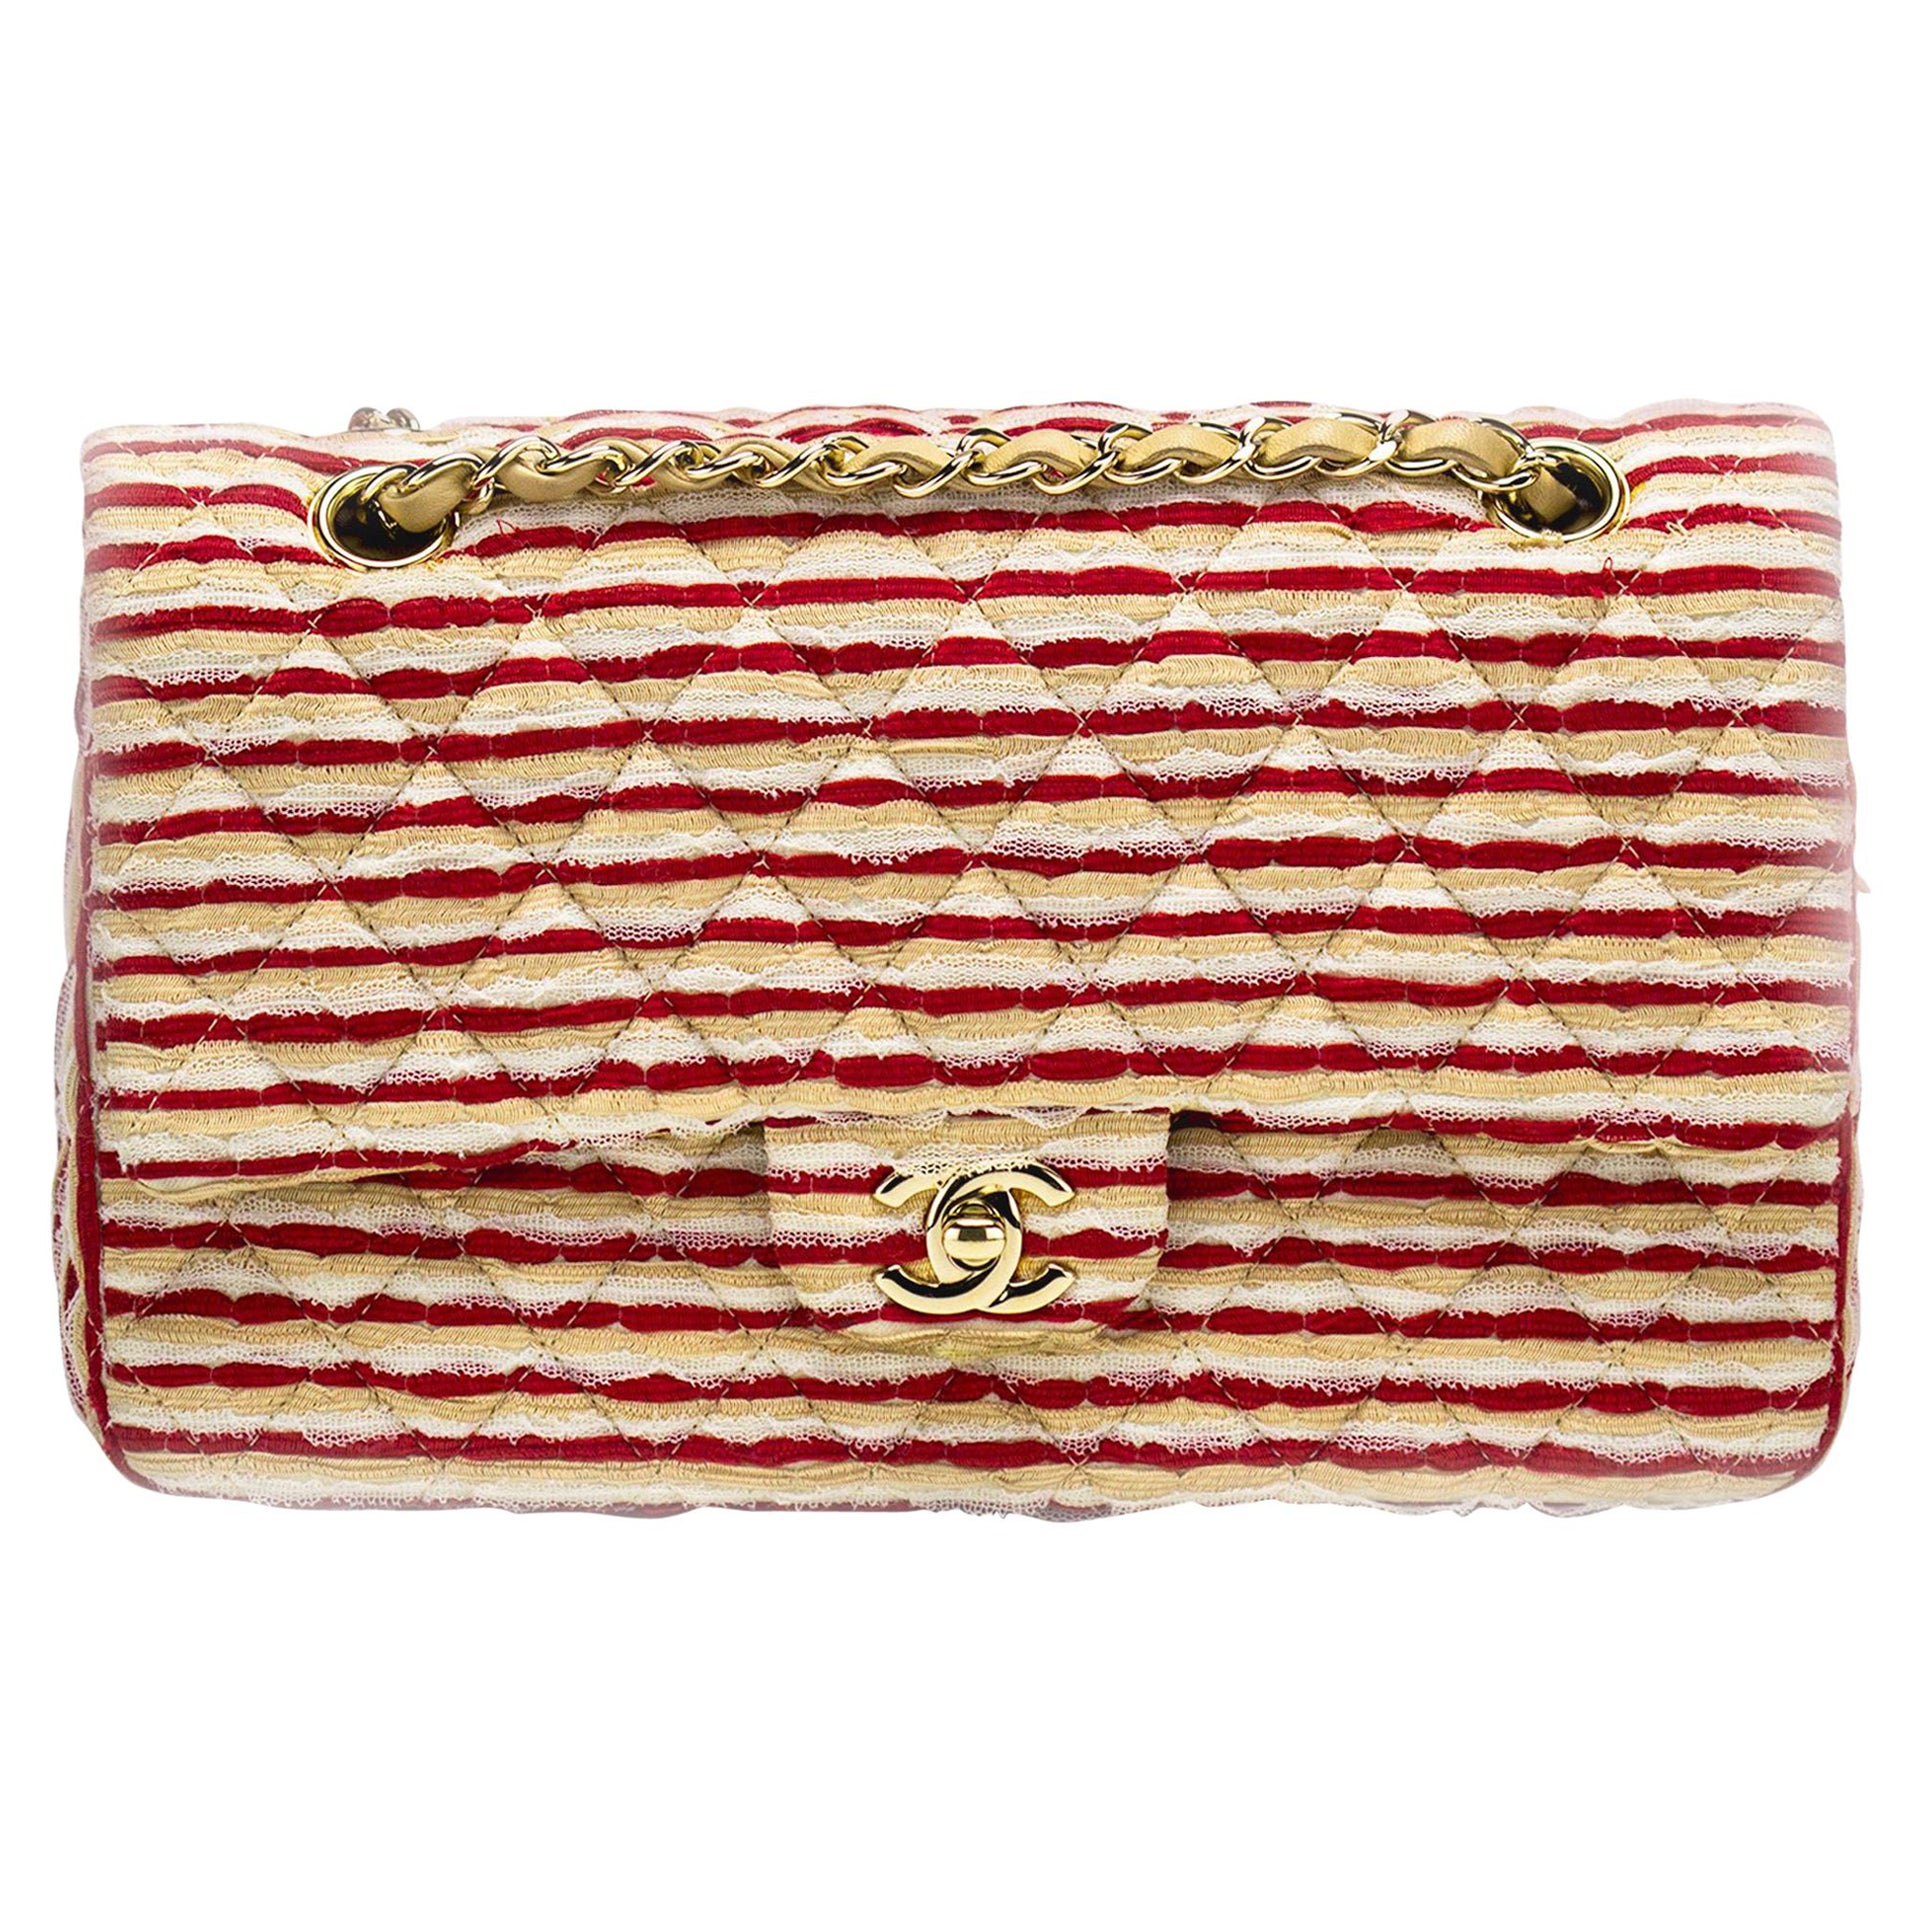 Chanel Medium Classic Vintage Striped Red and Beige Double